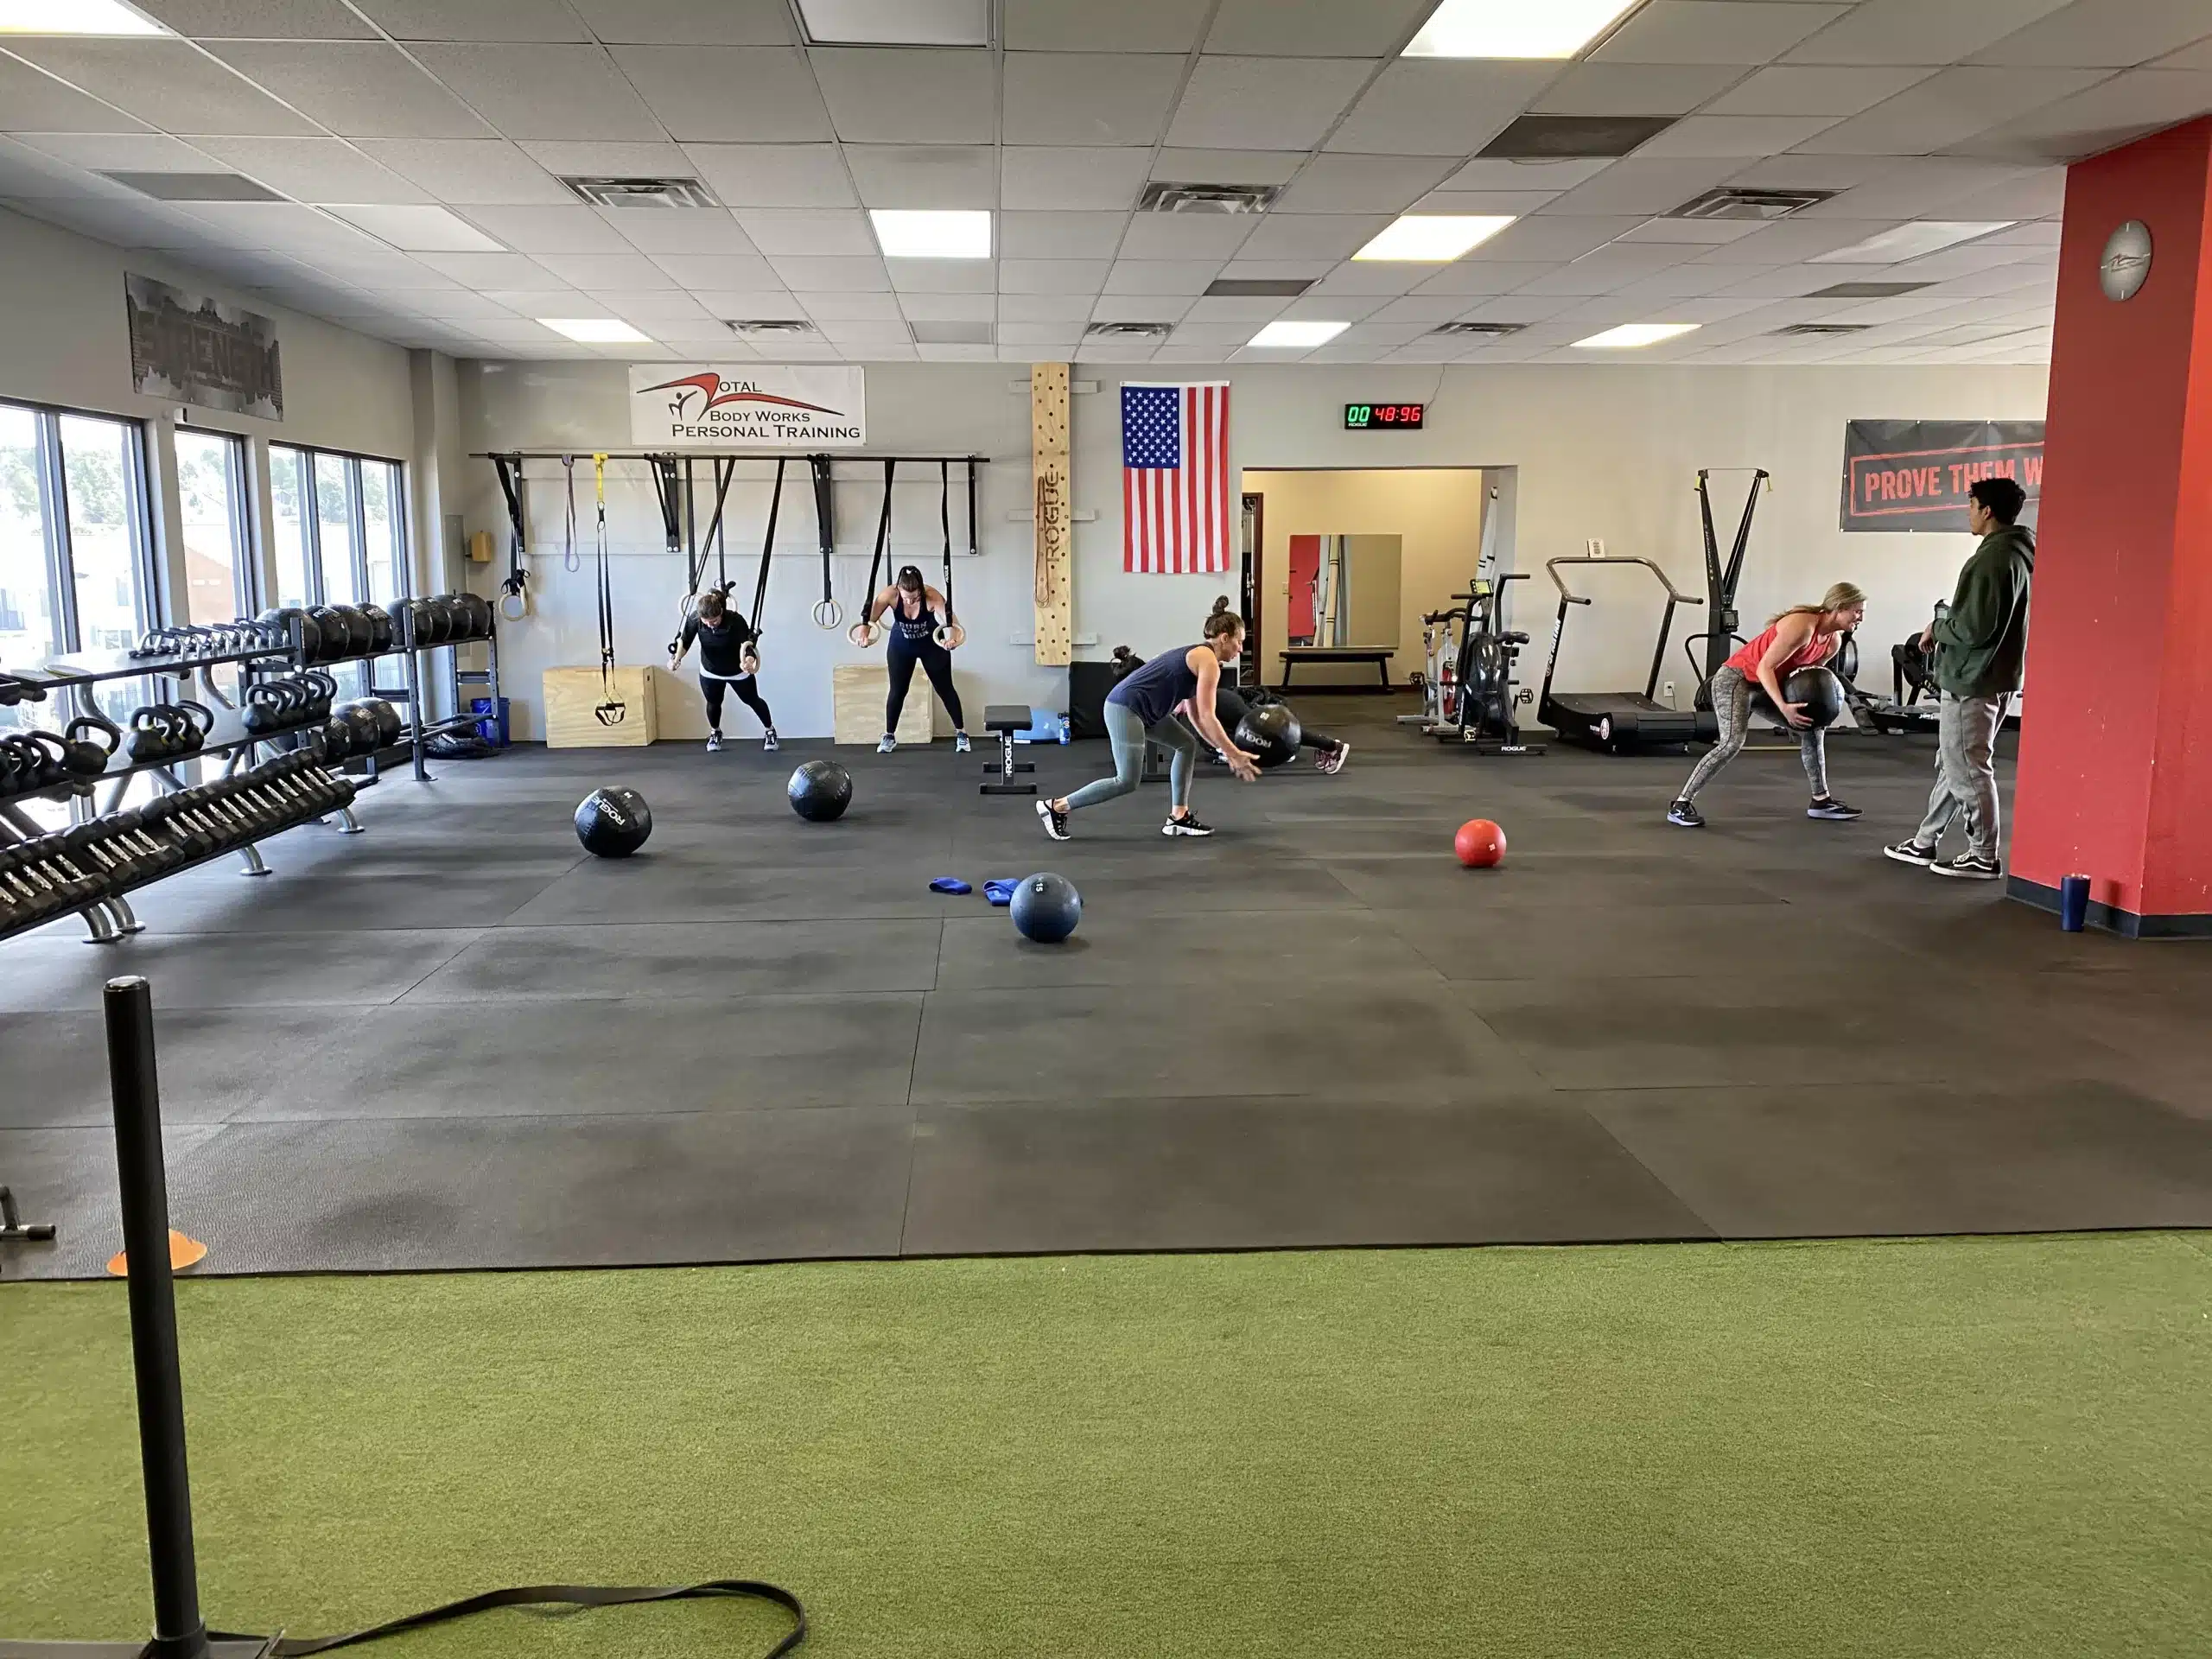 Small group fitness classes